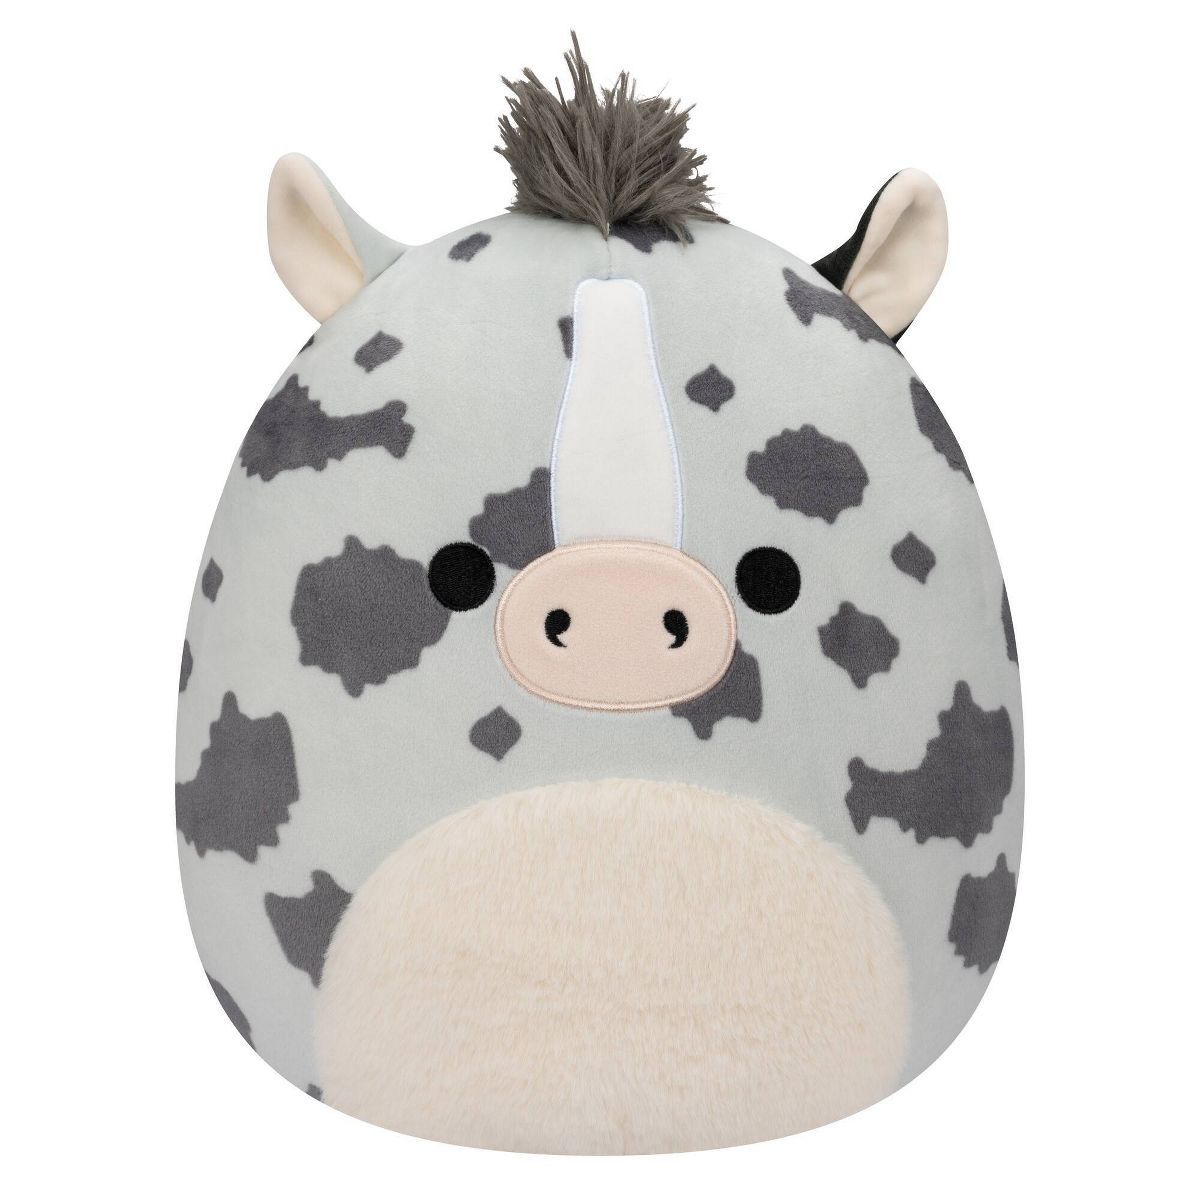 Squishmallows 11" Grady the Gray Appaloosa Painted Horse Plush Toy | Target